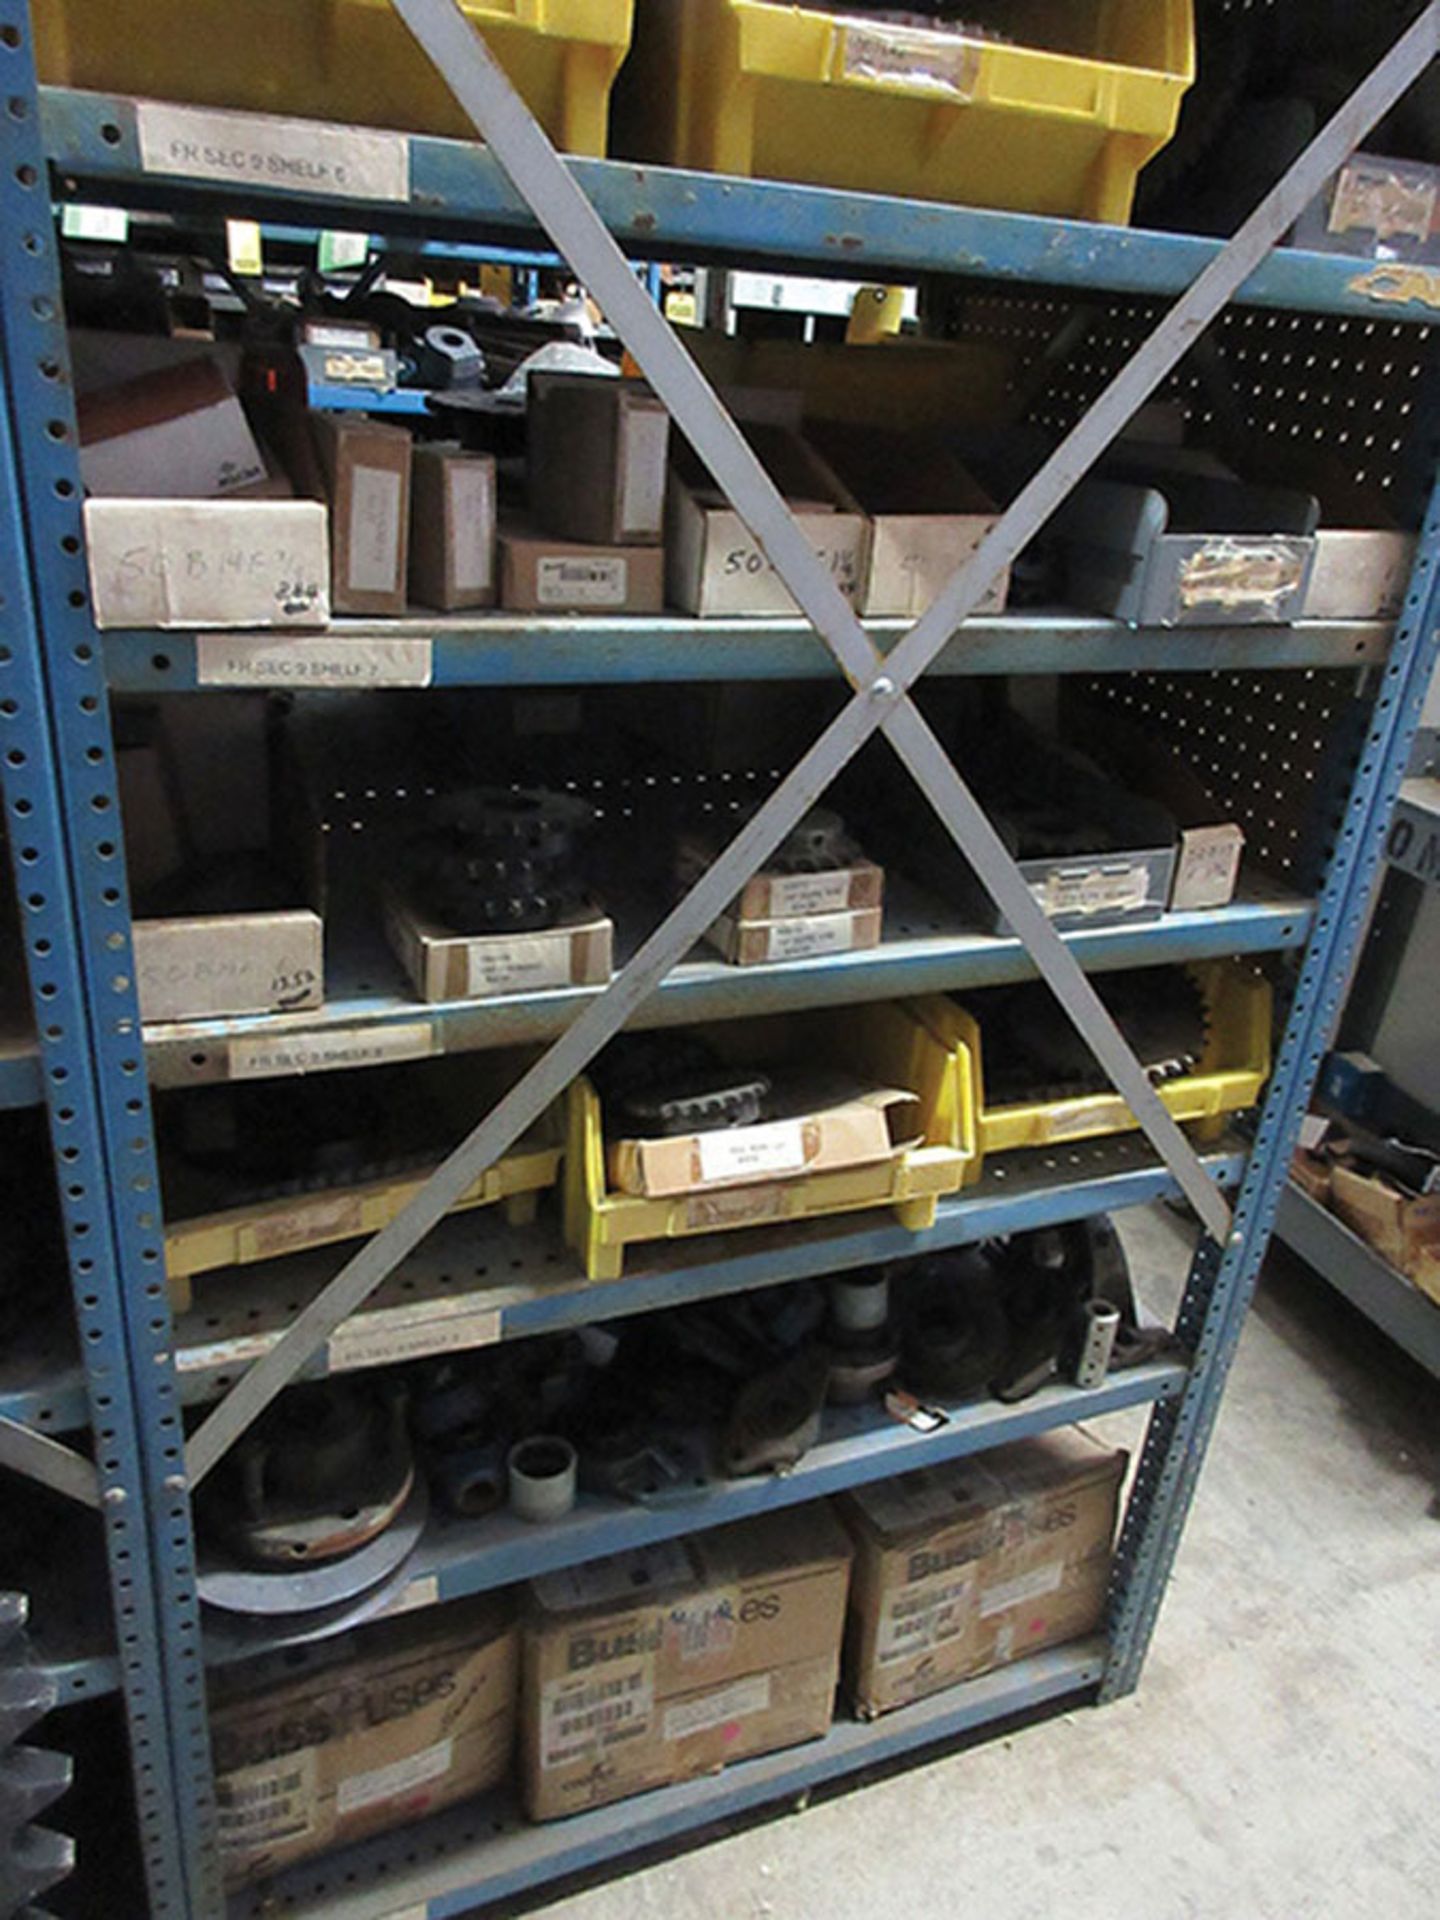 CONTENTS OF (1) SIDE, (5) SECTIONS OF SHELF UNIT: LARGE QUANTITY OF SOCKETS - MANY SIZES; BUSSMAN - Image 9 of 10